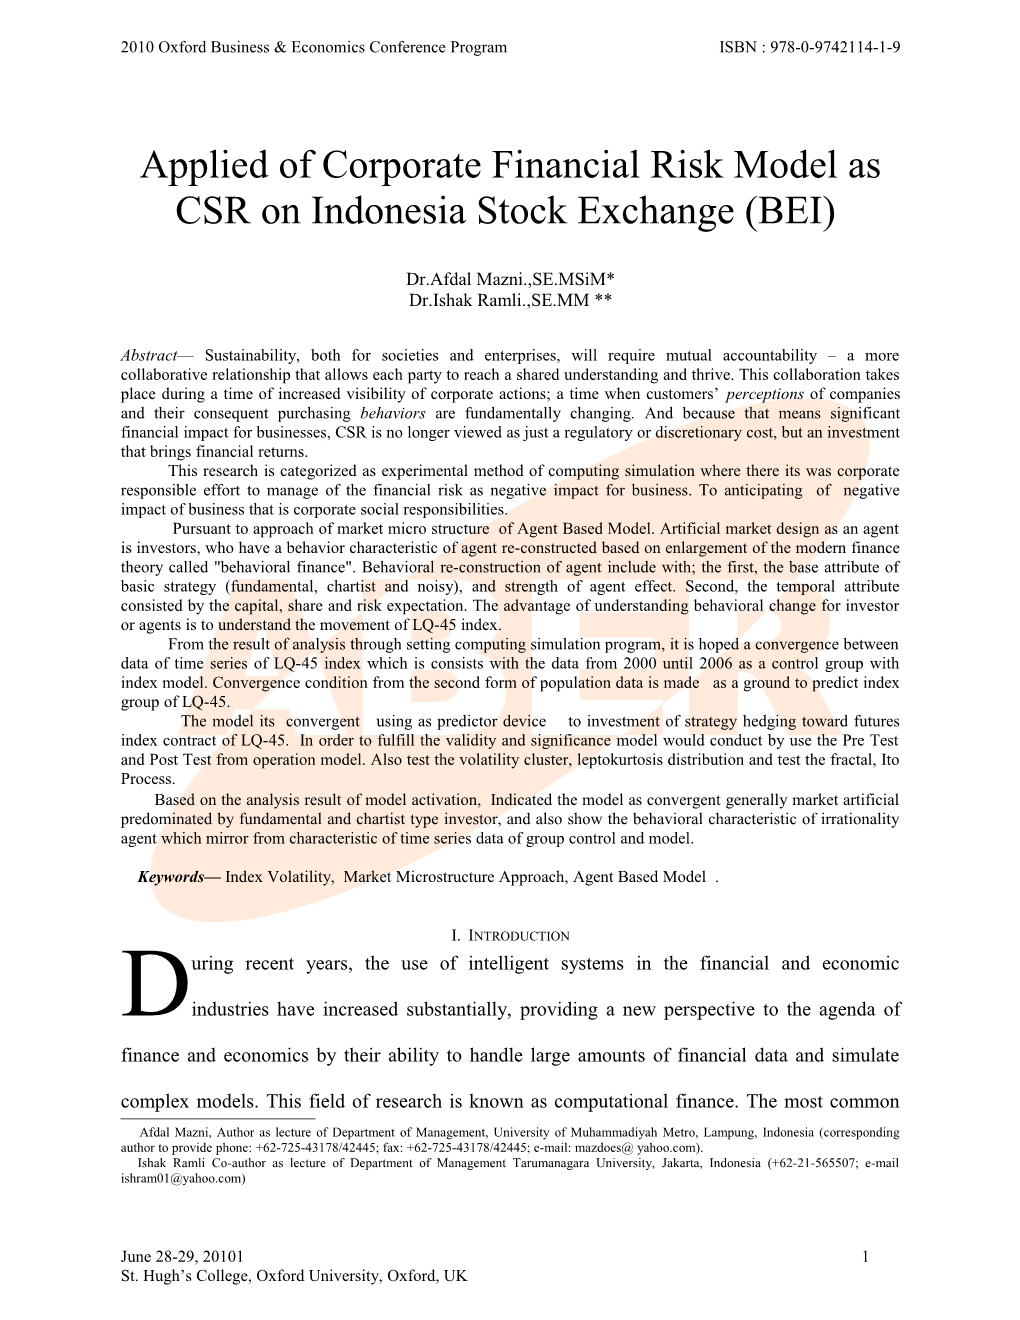 Applied of Corporate Financial Risk Model As CSR on Indonesia Stock Exchange (BEI)